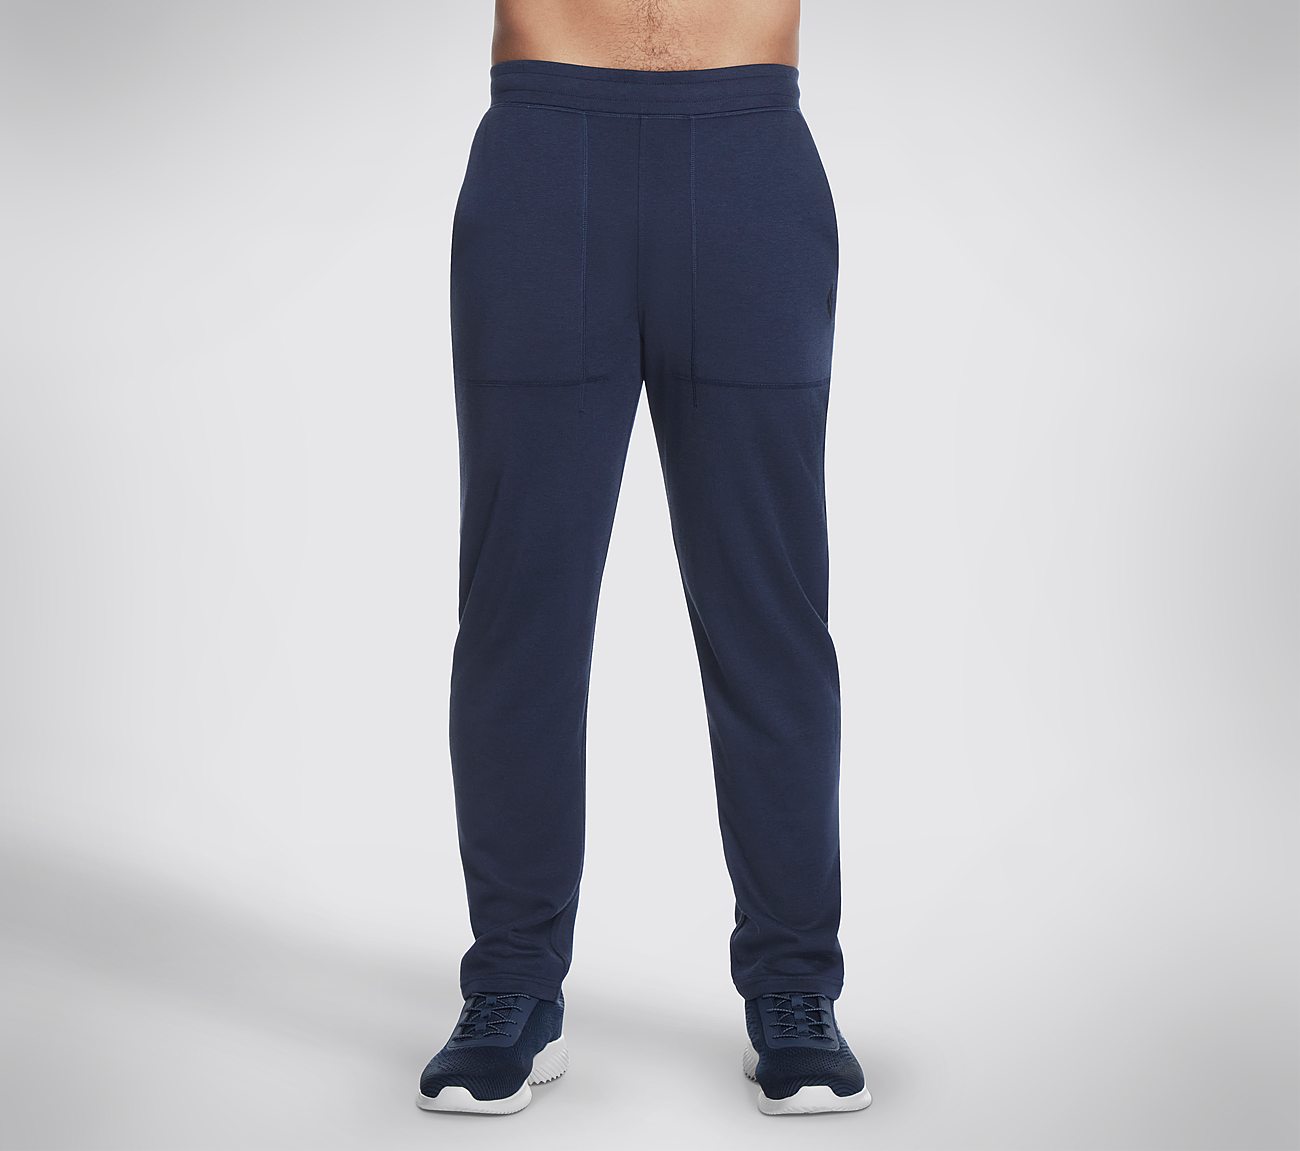 GOKNIT PIQUE LOUNGE PANT, NNNAVY Apparel Lateral View